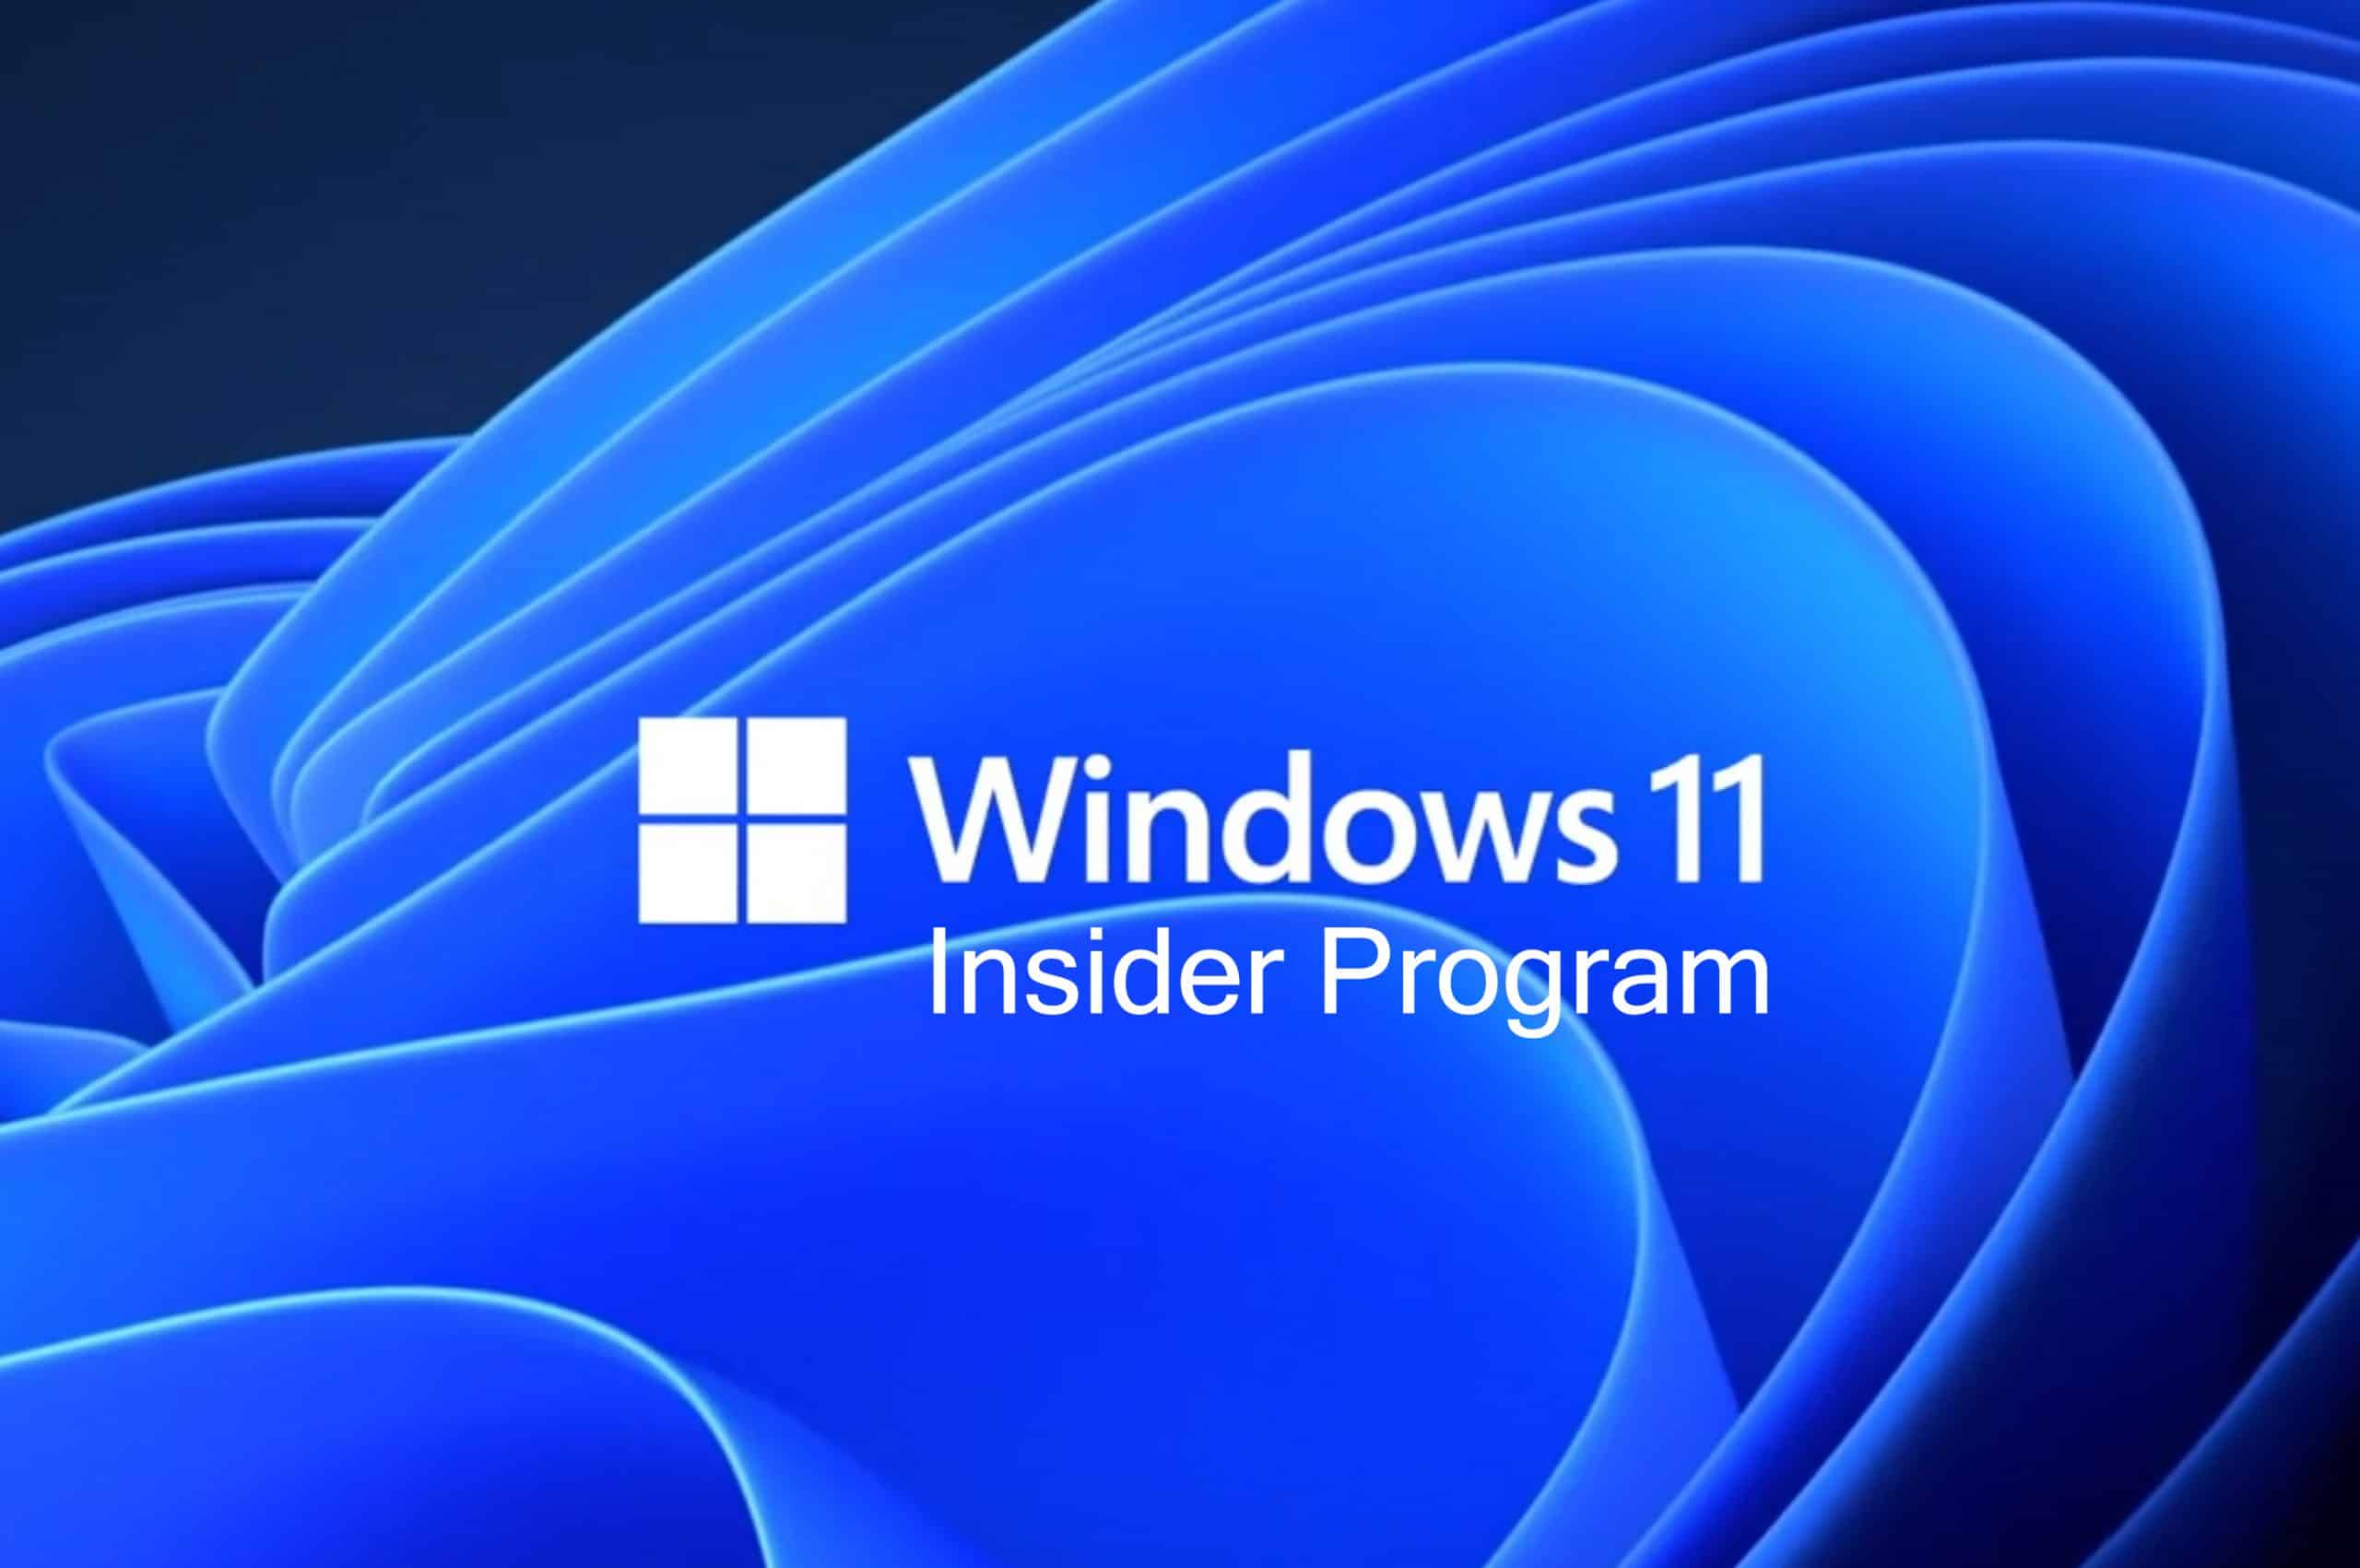 How to get the first Windows 11 Preview builds